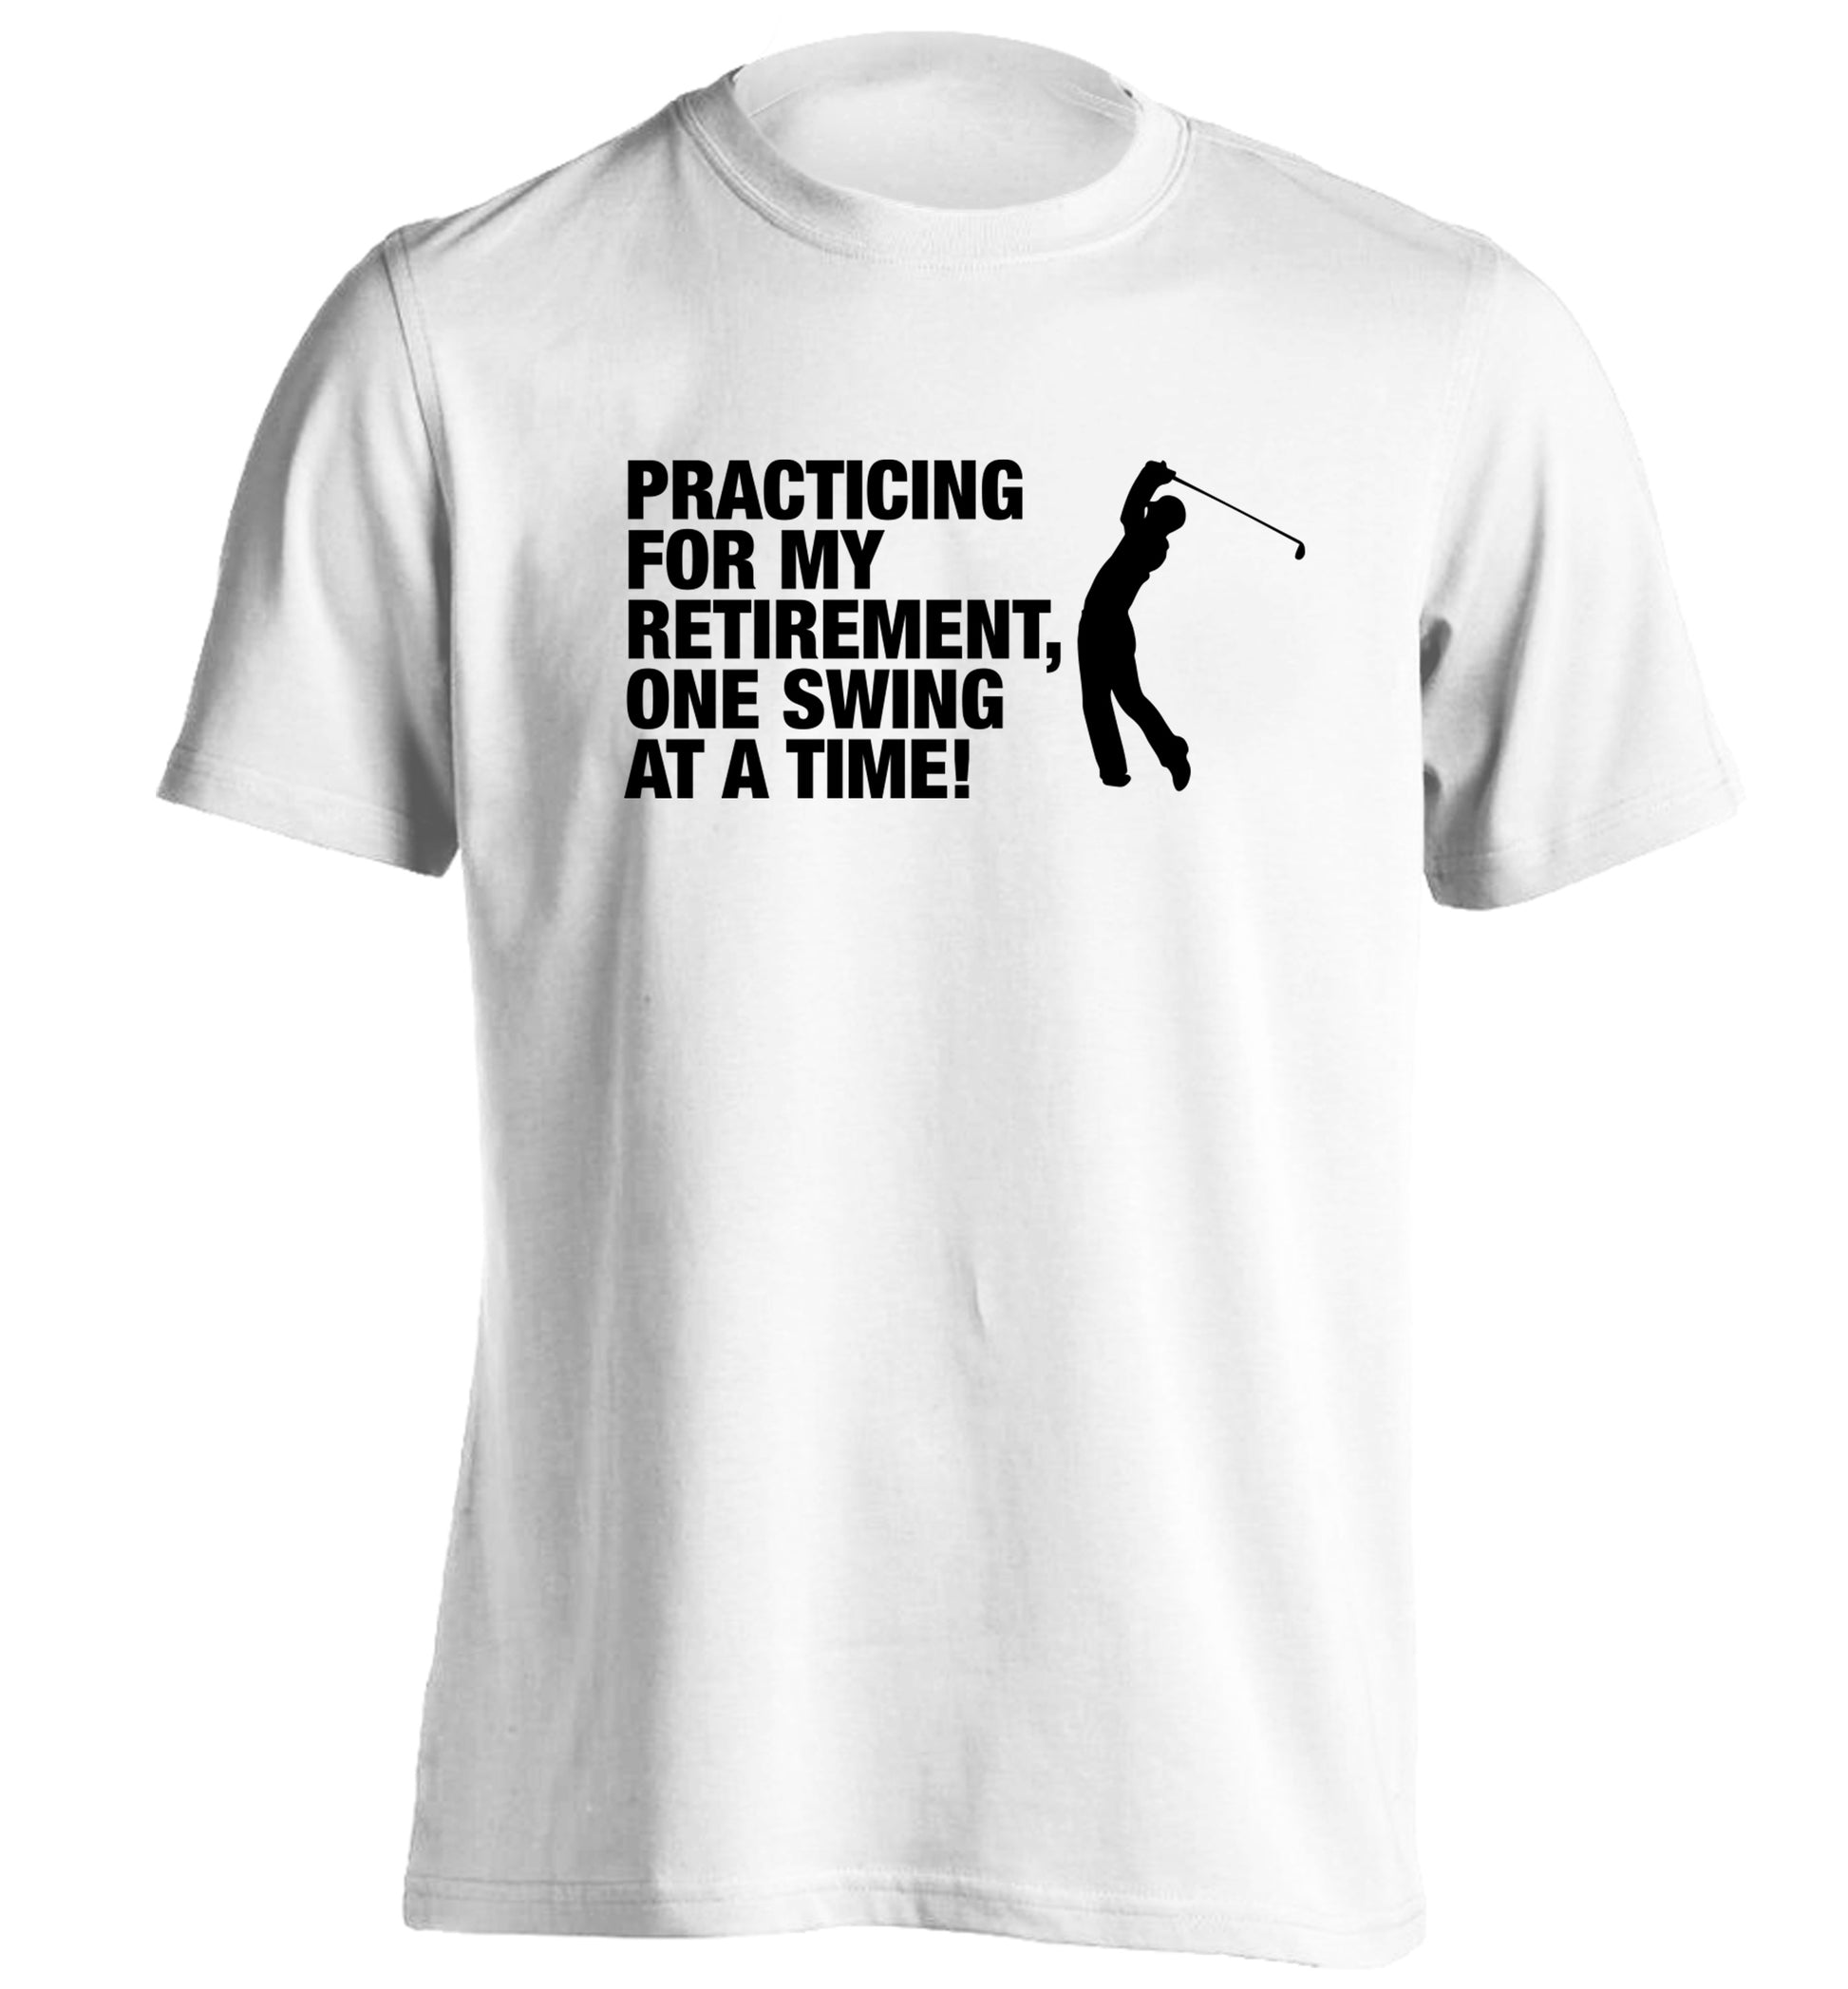 Practicing for my retirement one swing at a time adults unisex white Tshirt 2XL